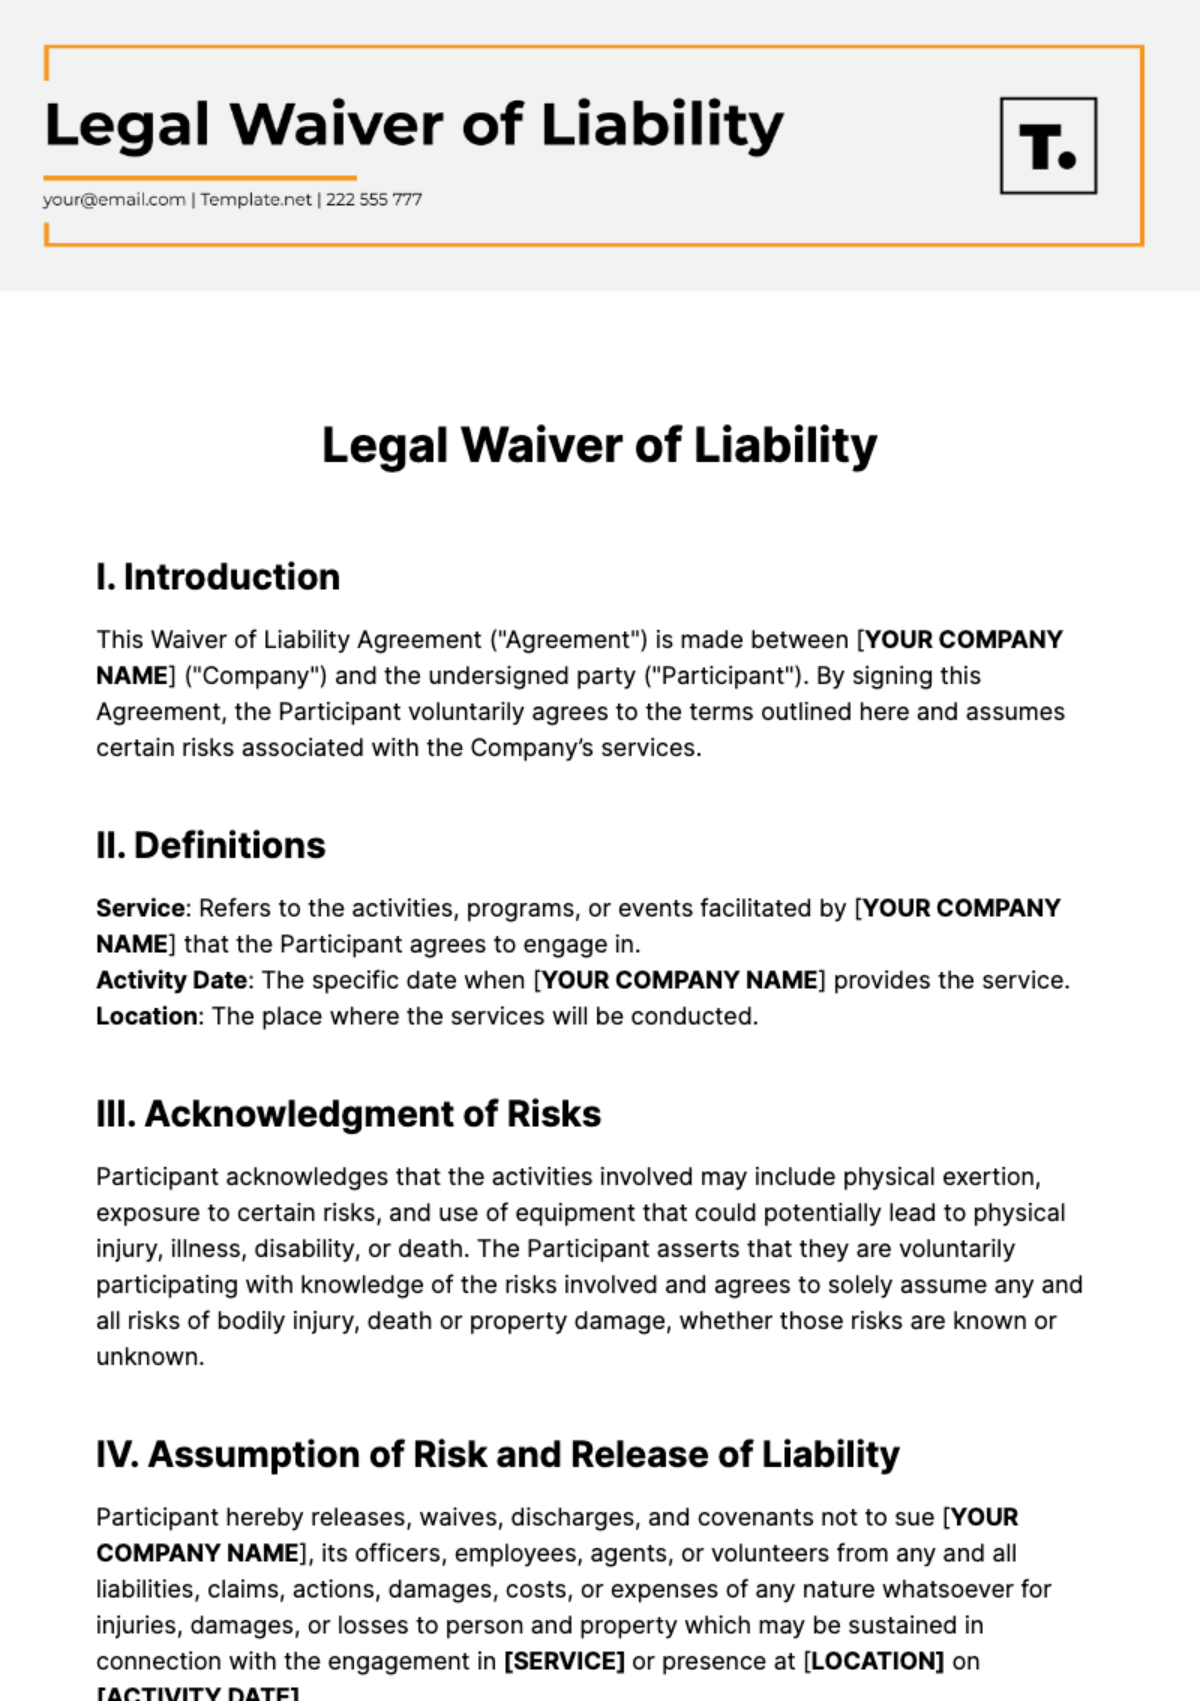 Free Legal Waiver of Liability Template